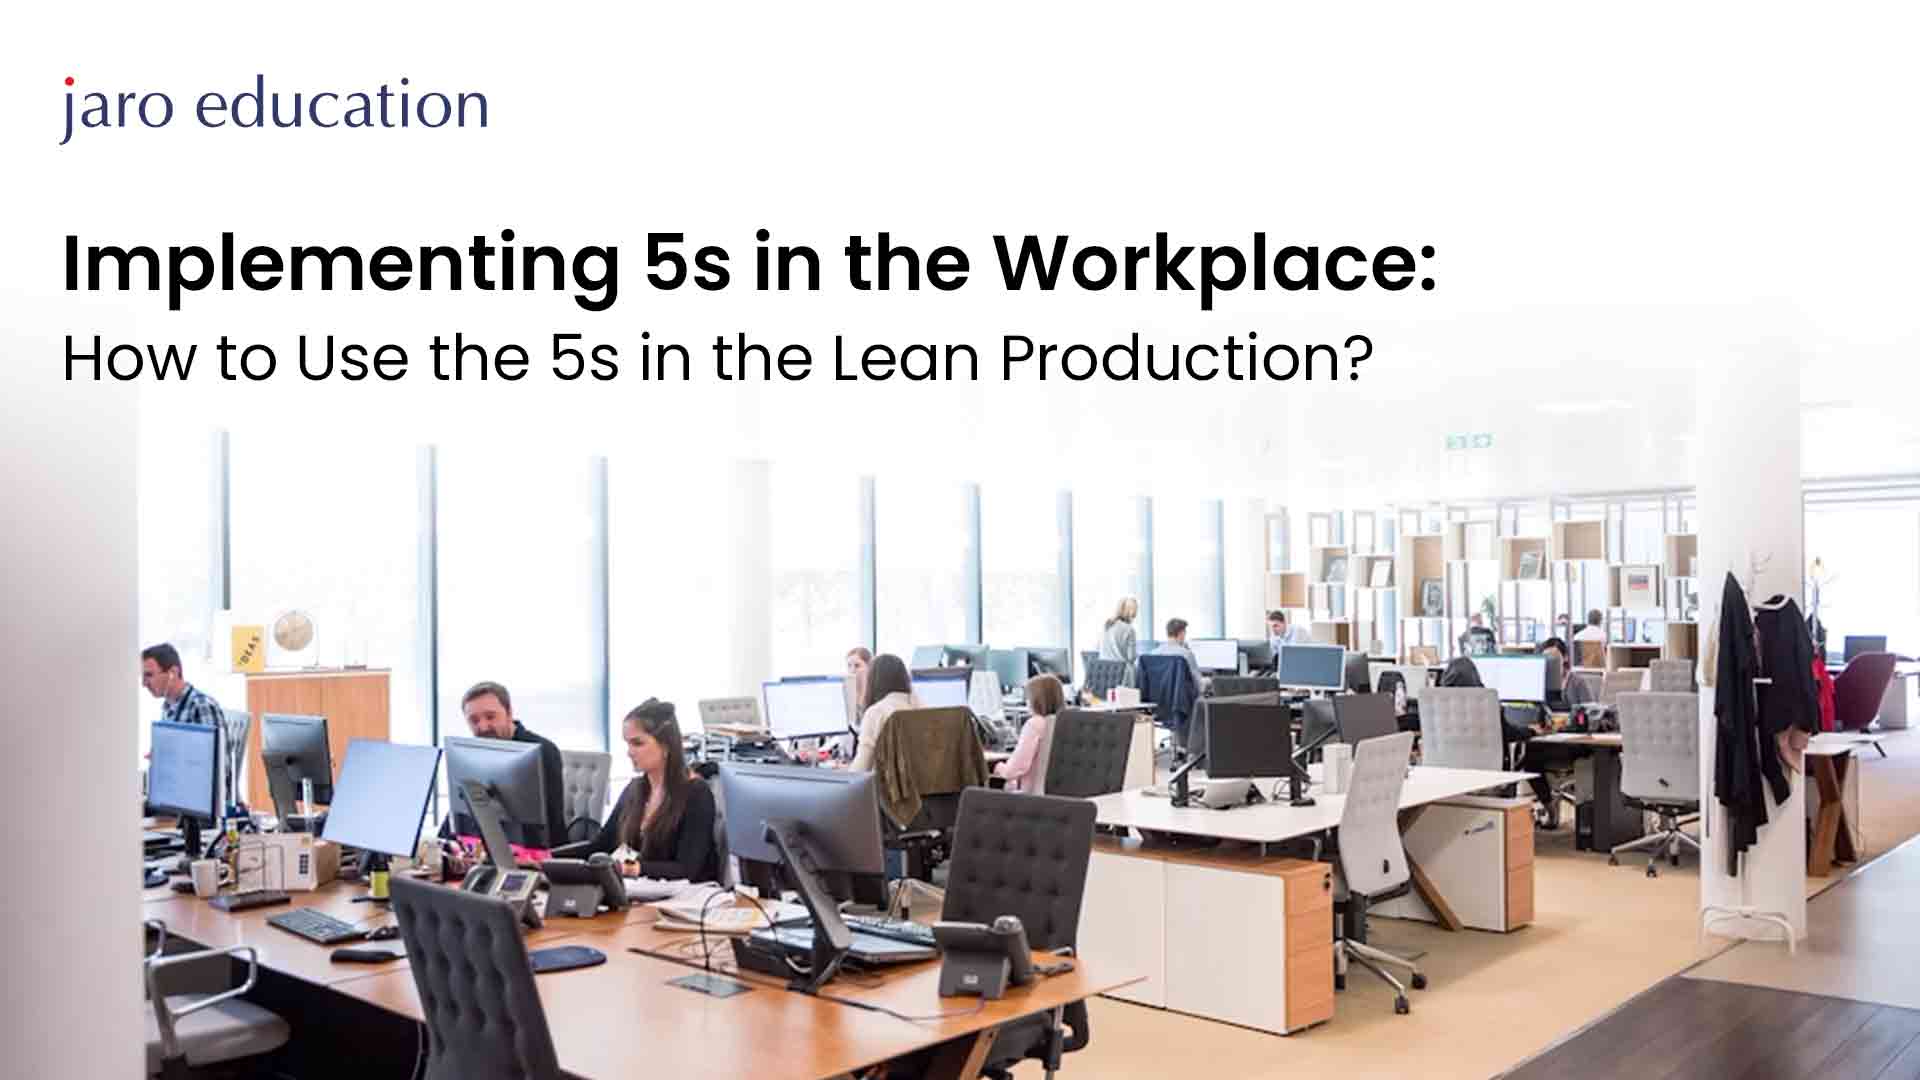 Implementing 5s in the Workplace How to Use the 5s in the Lean Production